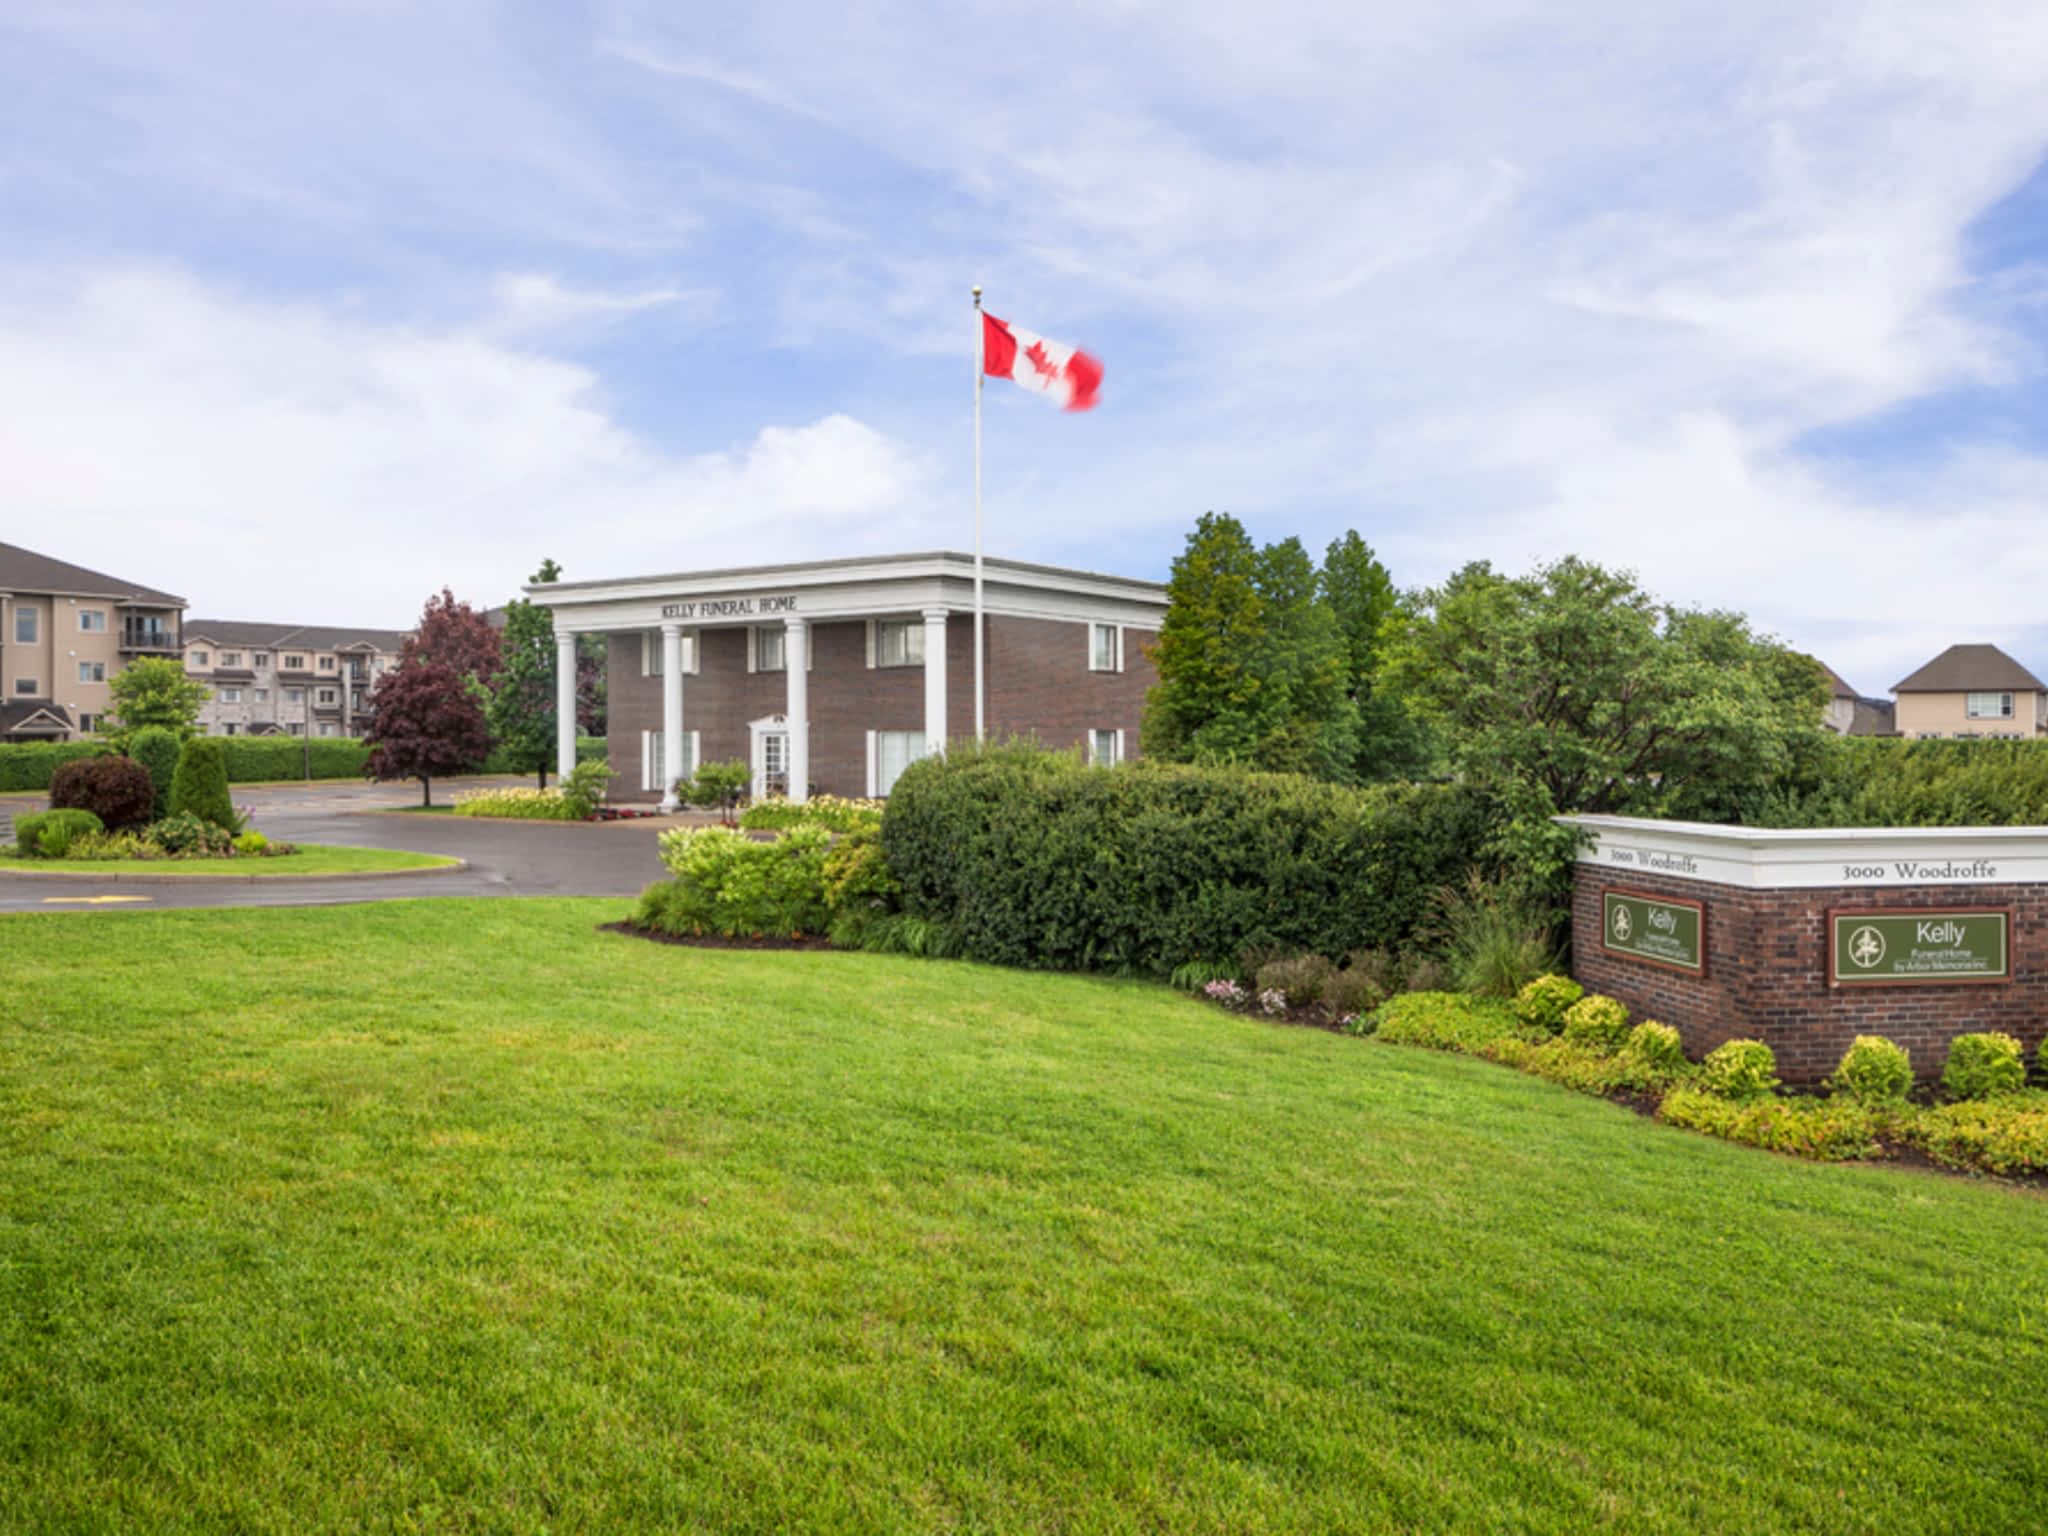 photo Kelly Funeral Home - Barrhaven Chapel